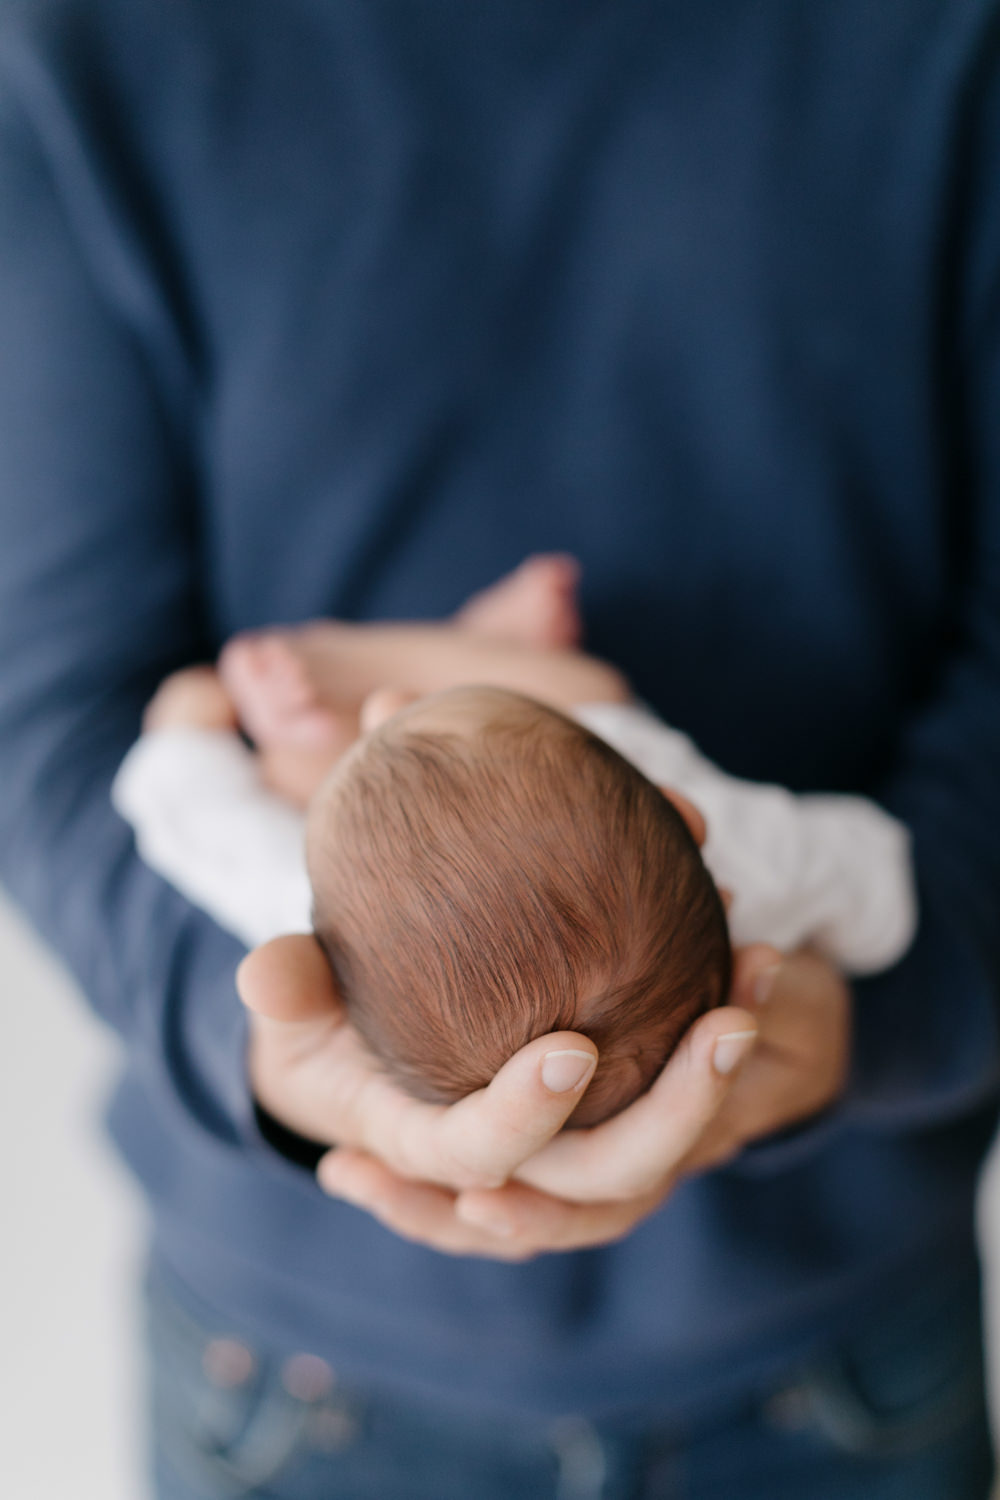 A close up portrait of a father's hands holding his small newborn baby, only the father's hands and the baby's hair and the out of focus rest of the body of the baby showing in a newborn portrait taken by San Luis Obispo newborn photographer, Tayler Enerle.